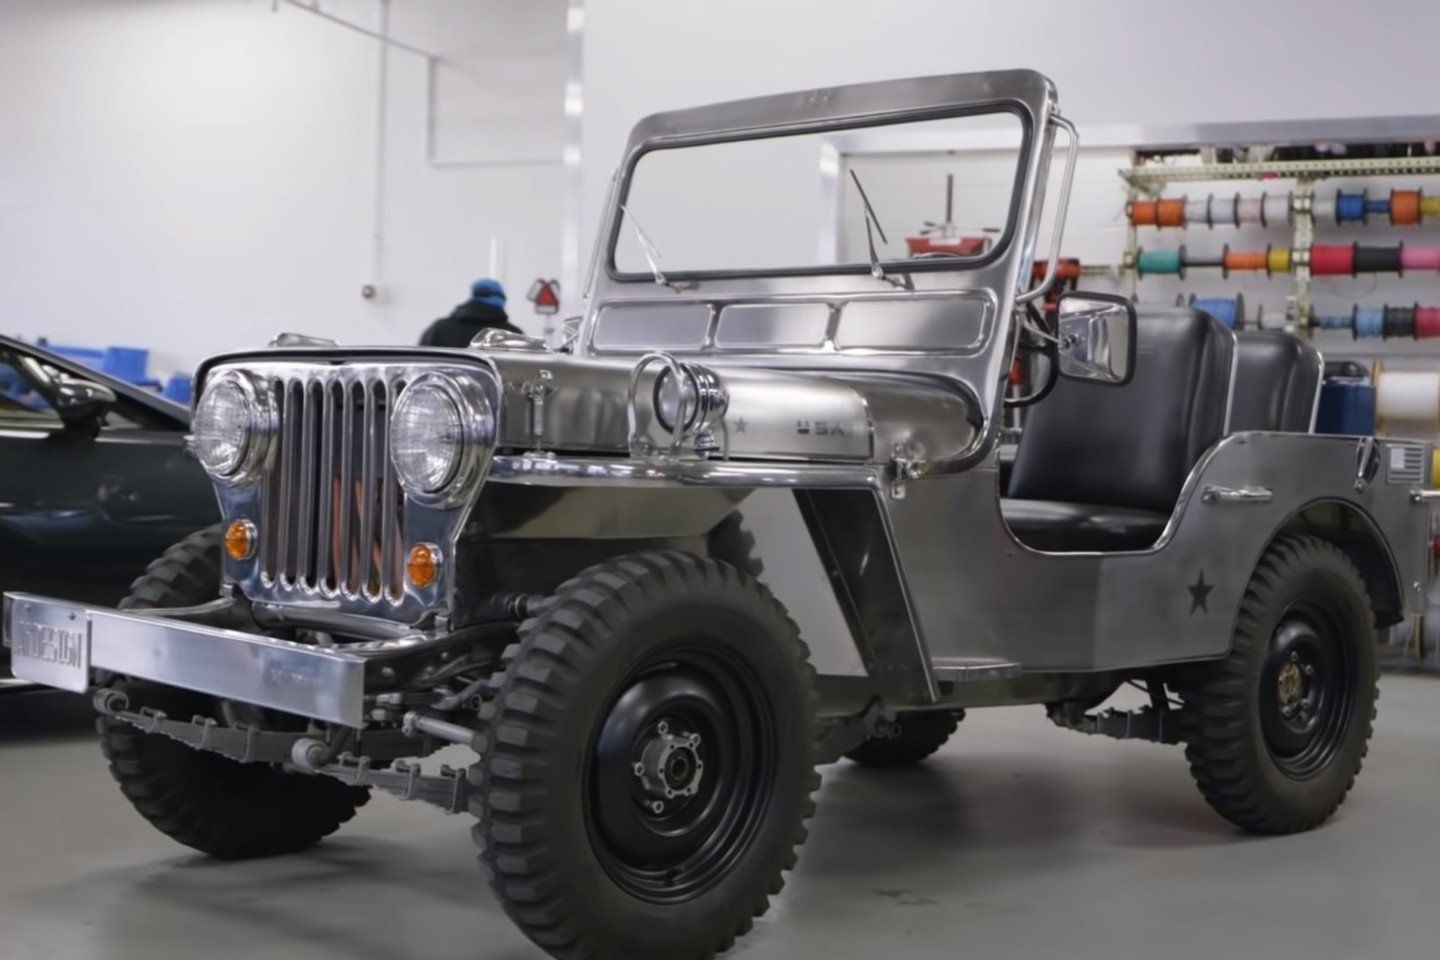 The EV converted Willys Jeep is outfitted with a historic stainless steel body.